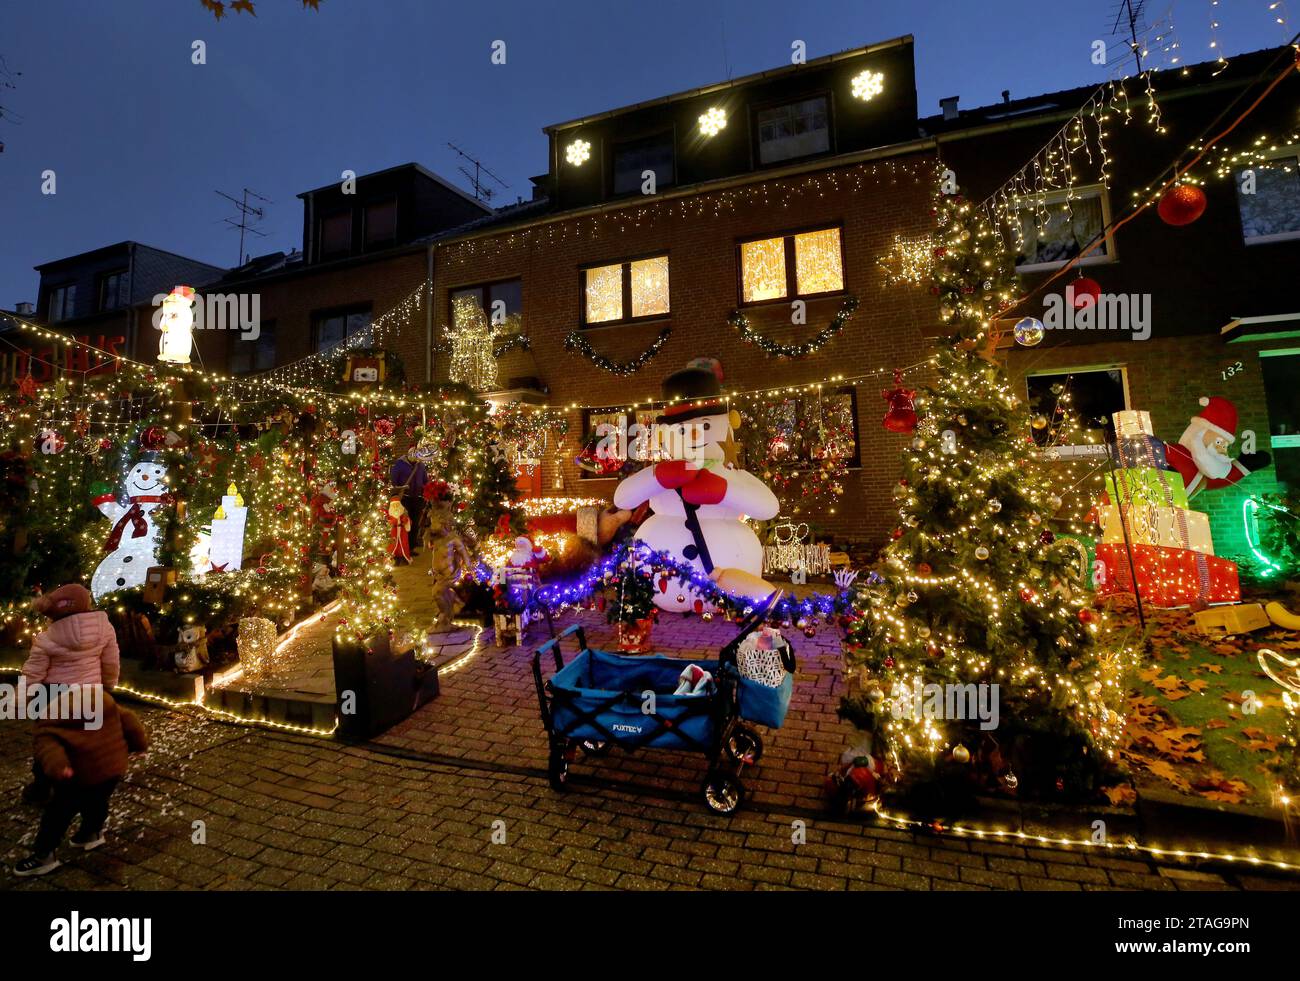 Oberhausen, Germany. 28th Nov, 2023. Dirk van Acken's home, decorated for Christmas, shines in all colors. Around 70,000 lights are shining on his house and inside there is a veritable frenzy of decorations: nutcrackers, reindeer, mini Christmas houses, countless figures and Christmas knick-knacks. Credit: Roland Weihrauch/dpa/Alamy Live News Stock Photo